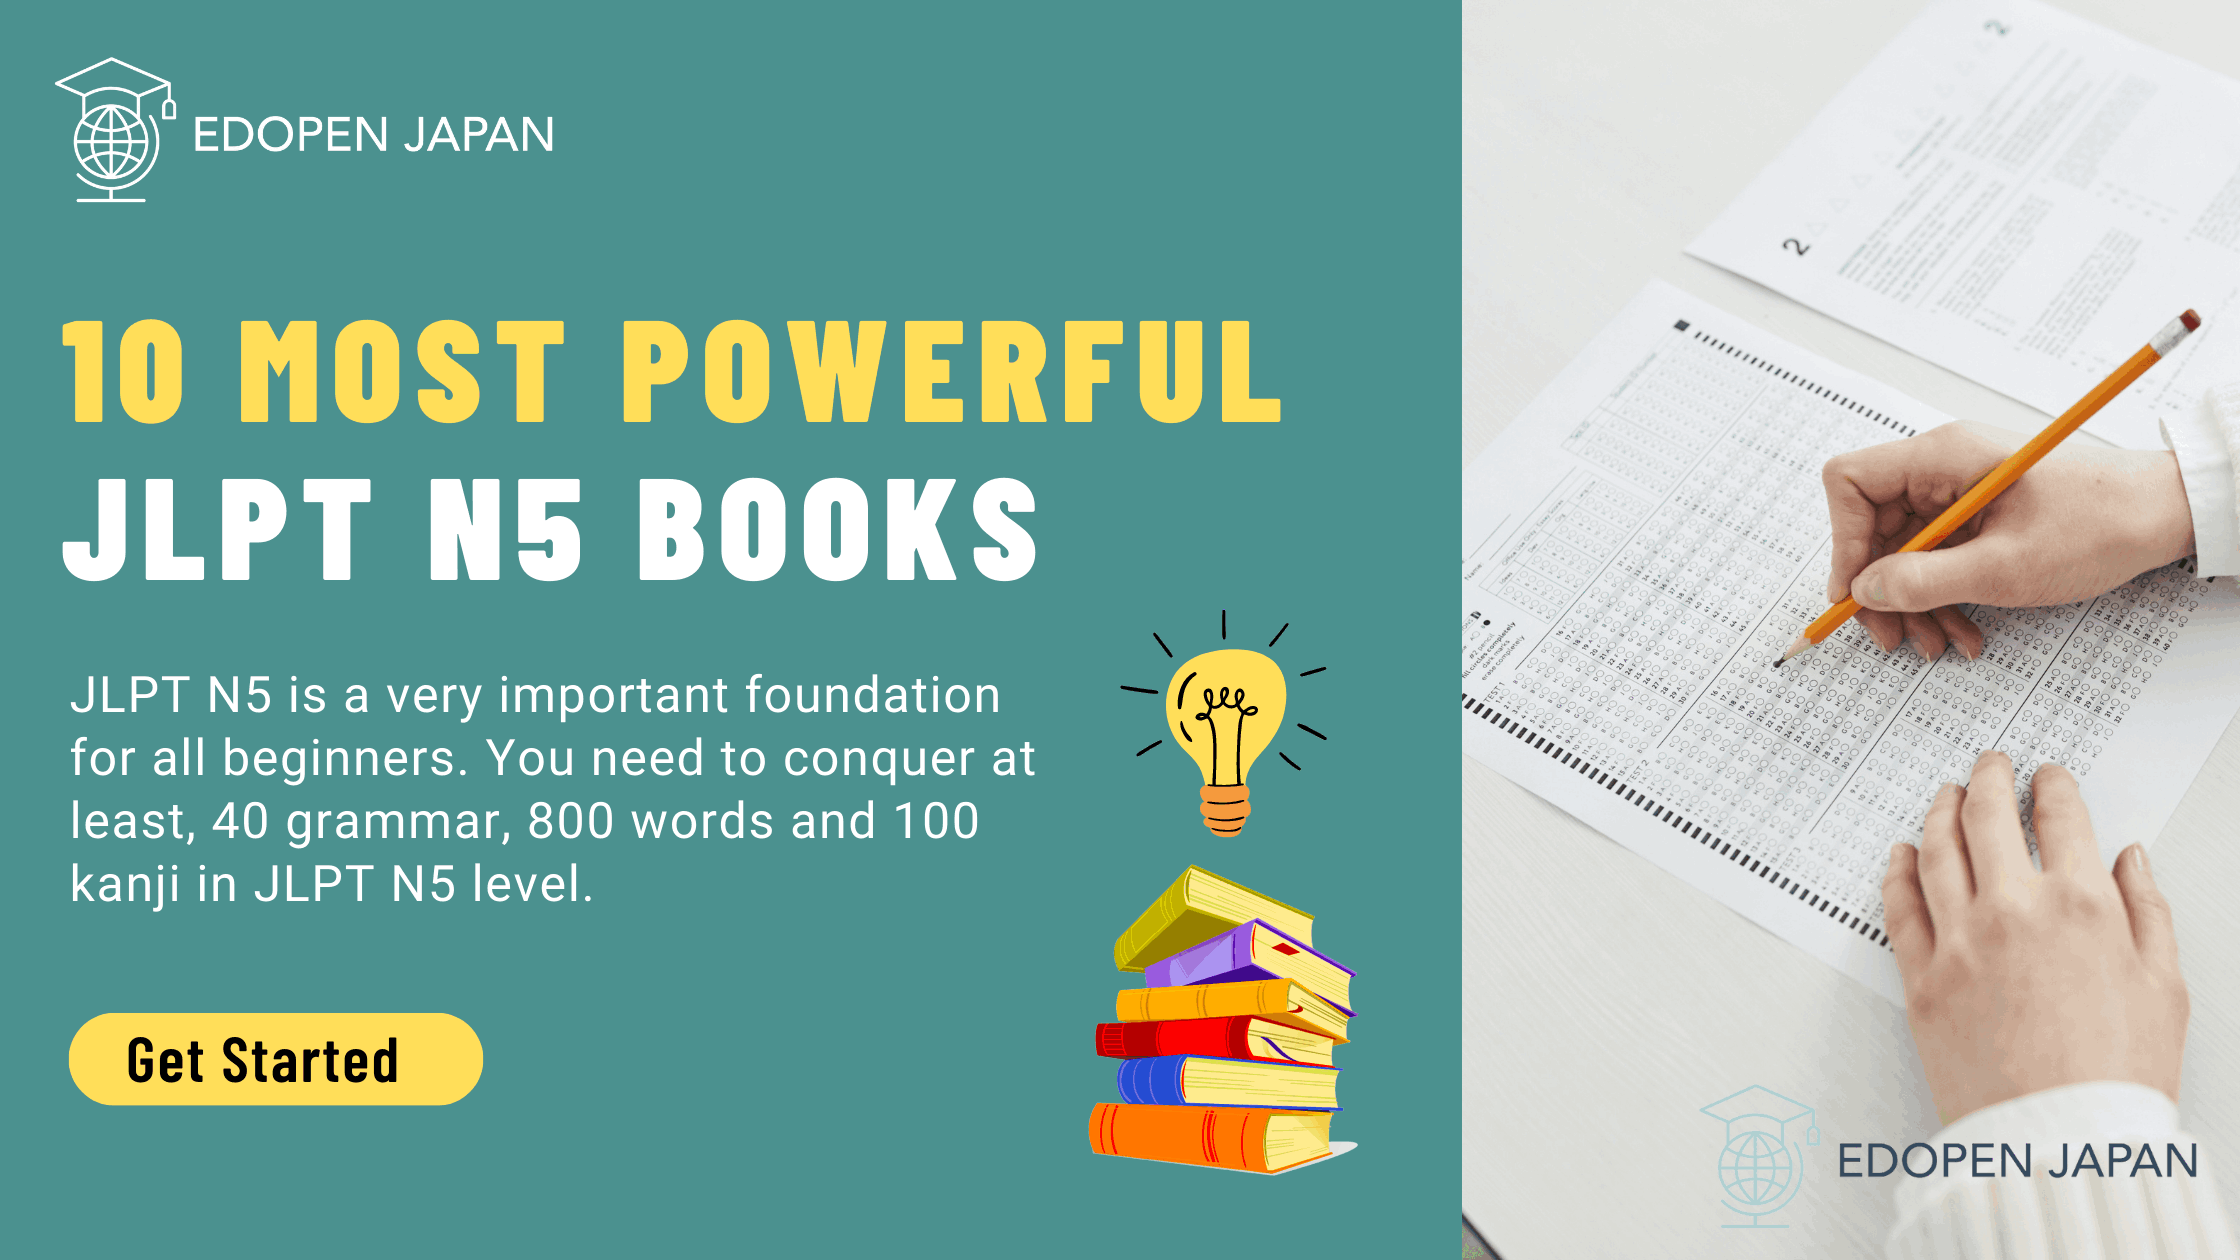 10 Most Famous & Powerful Textbooks to Pass JLPT N5 You Need to Know - EDOPEN